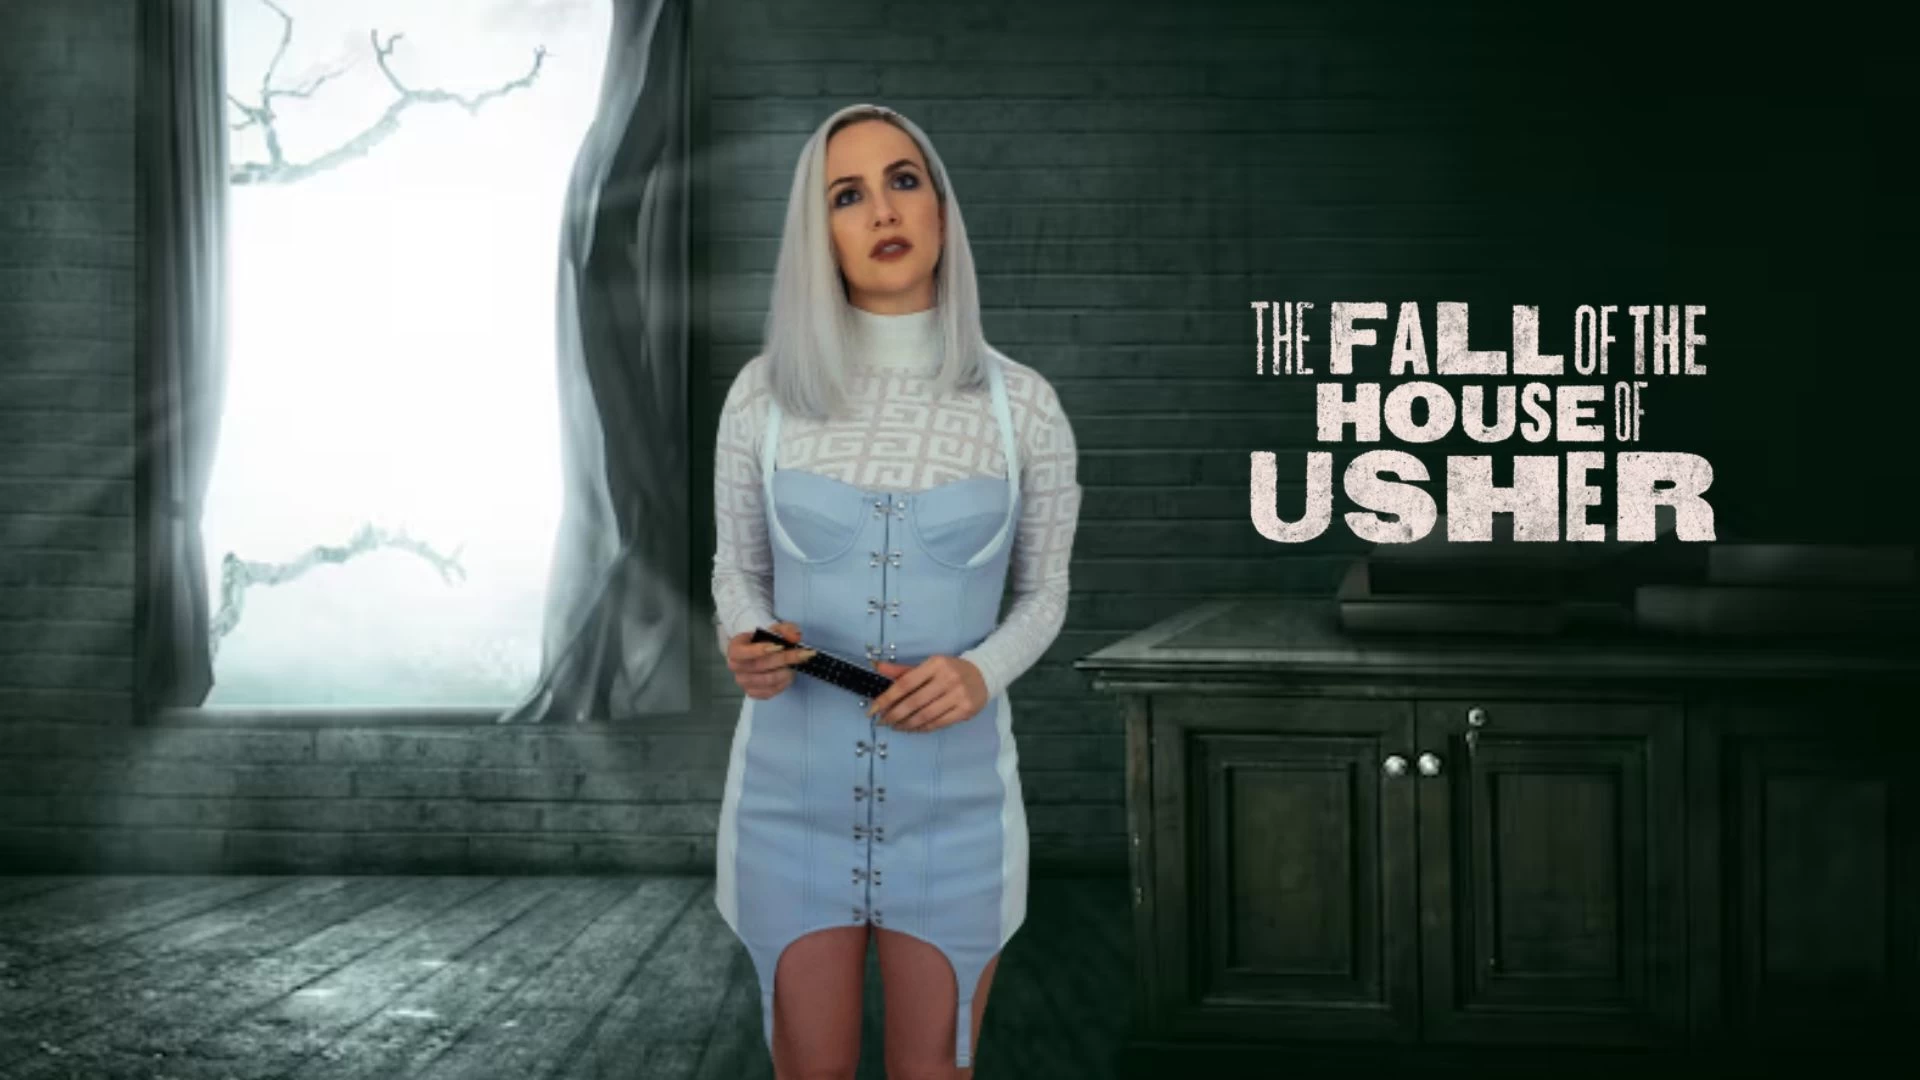 The Fall of the House of Usher Ending Explained, Release date, Cast, Plot, Summary, Where to Watch, and More